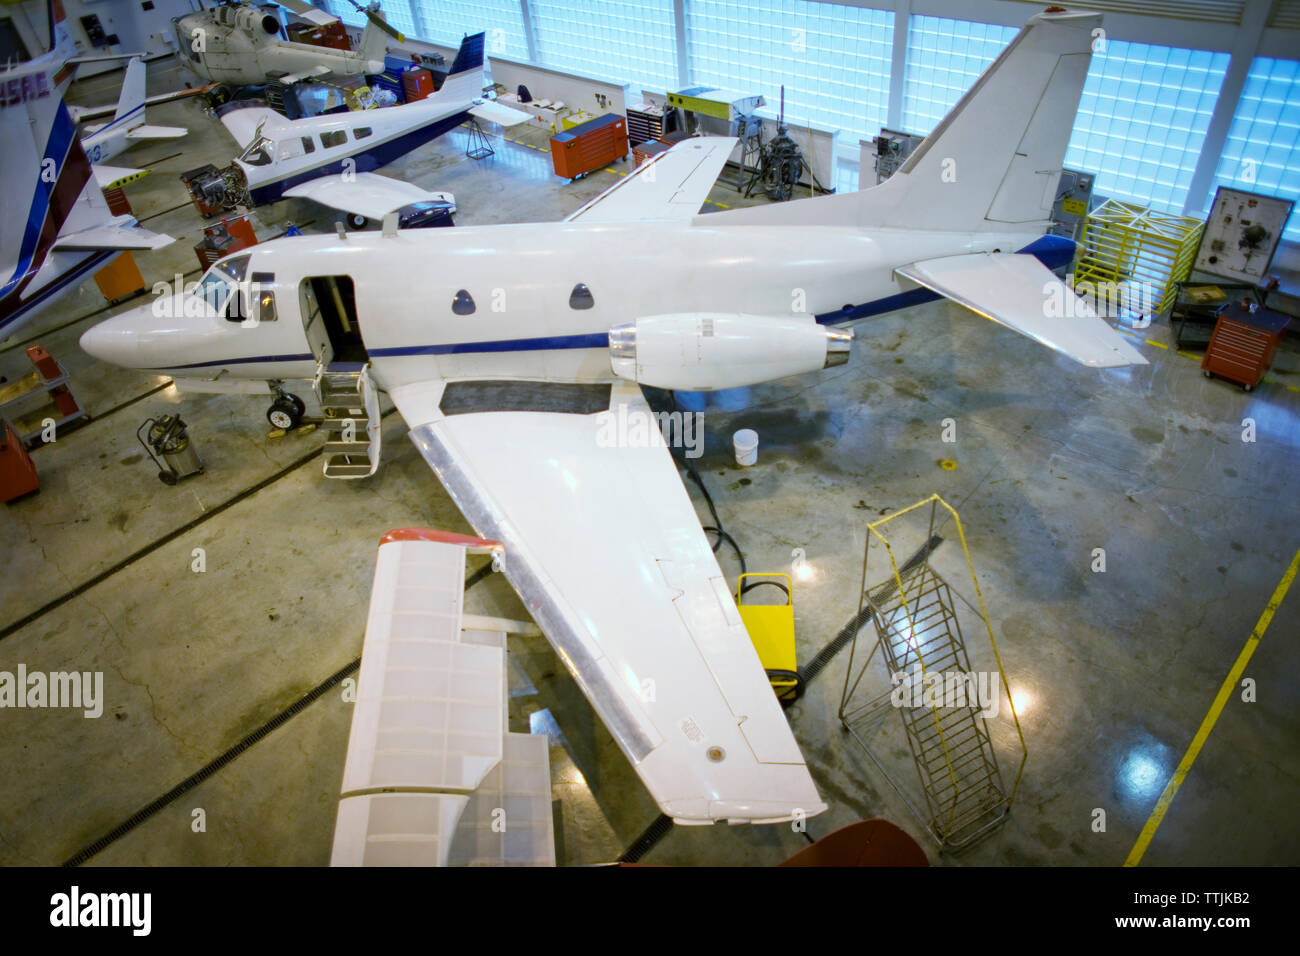 High angle view of aircraft in airplane hangar Stock Photo